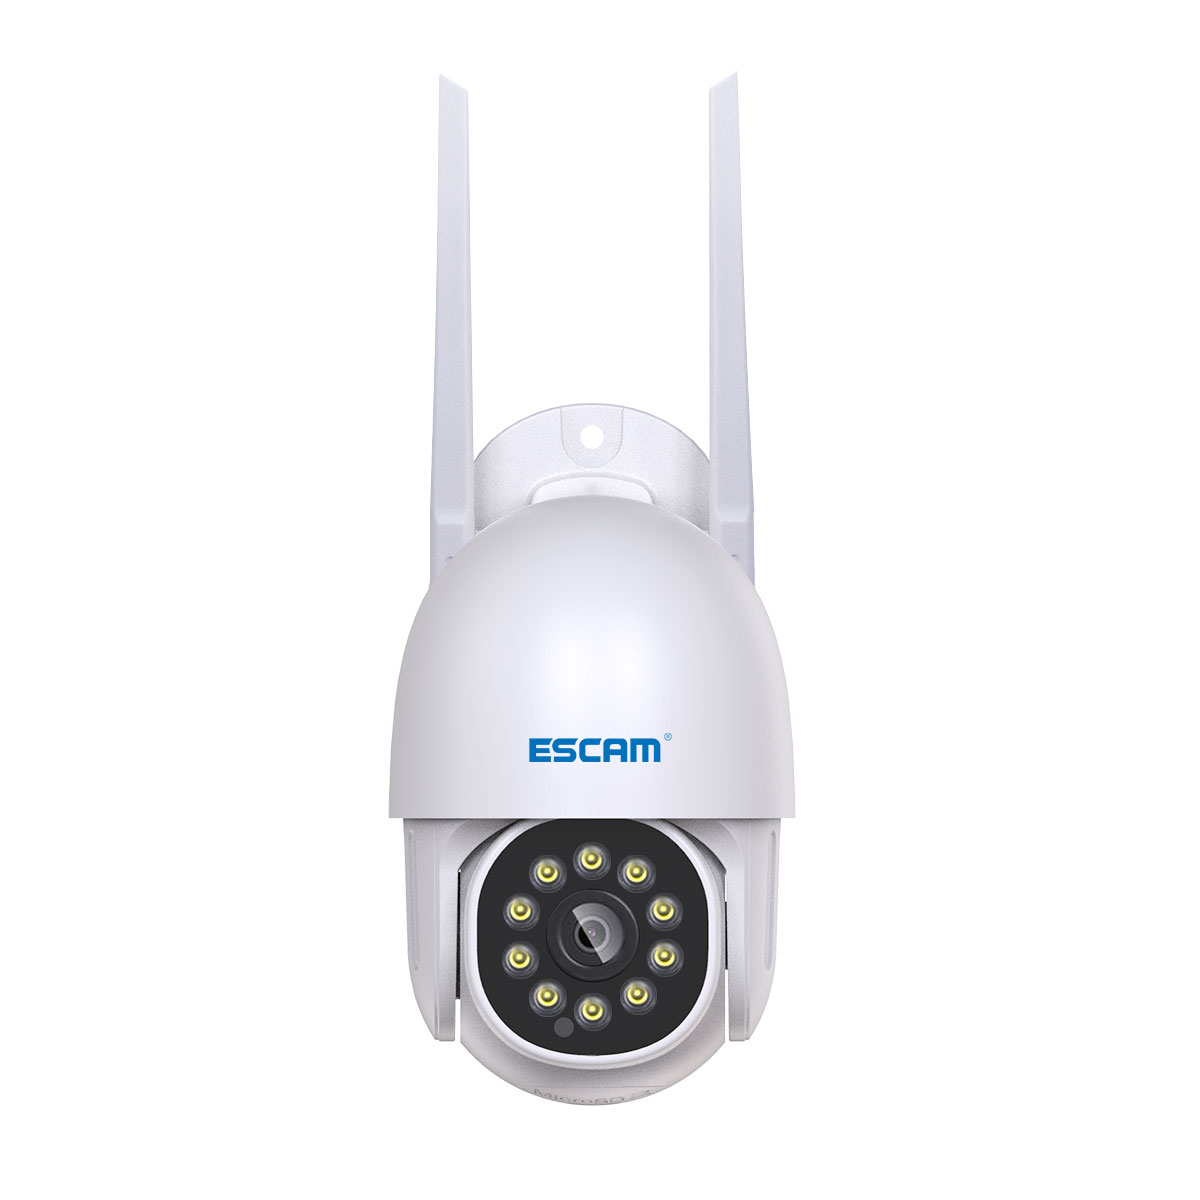 ESCAM-PT202-1080P-WiFi-IP-Camera-Infrared-Night-Vision-Waterproof-With-Motions-Detection-And-Automat-1784296-12